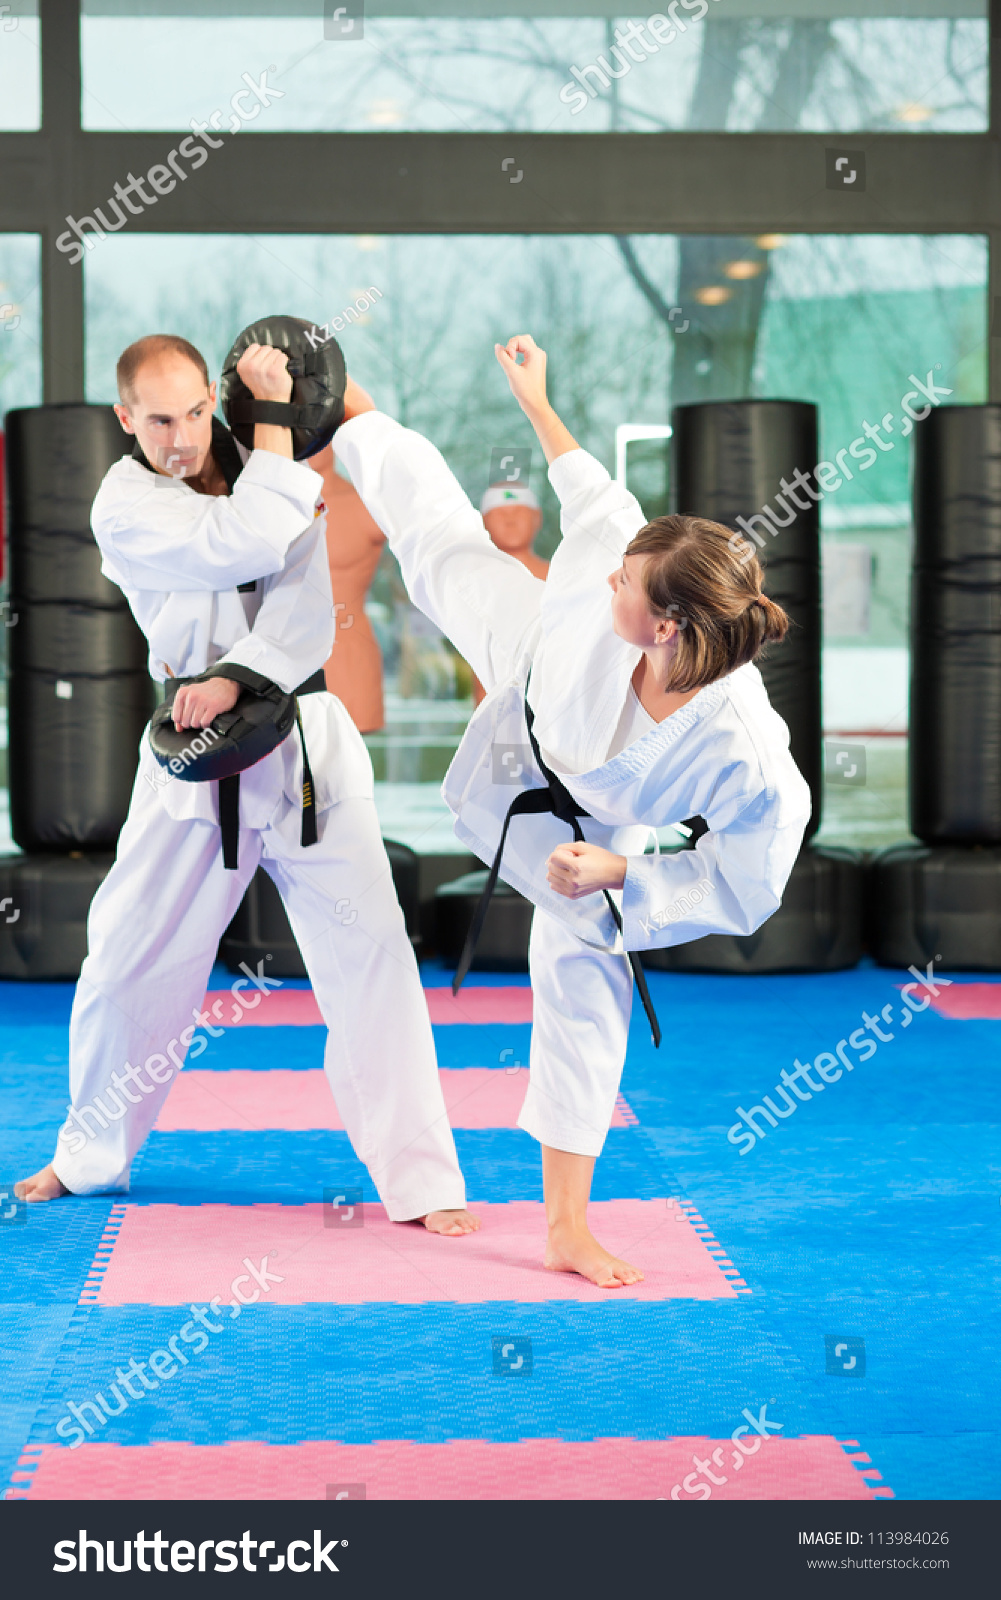 People in a gym in martial arts training exercising Taekwondo, both have a black belt #113984026